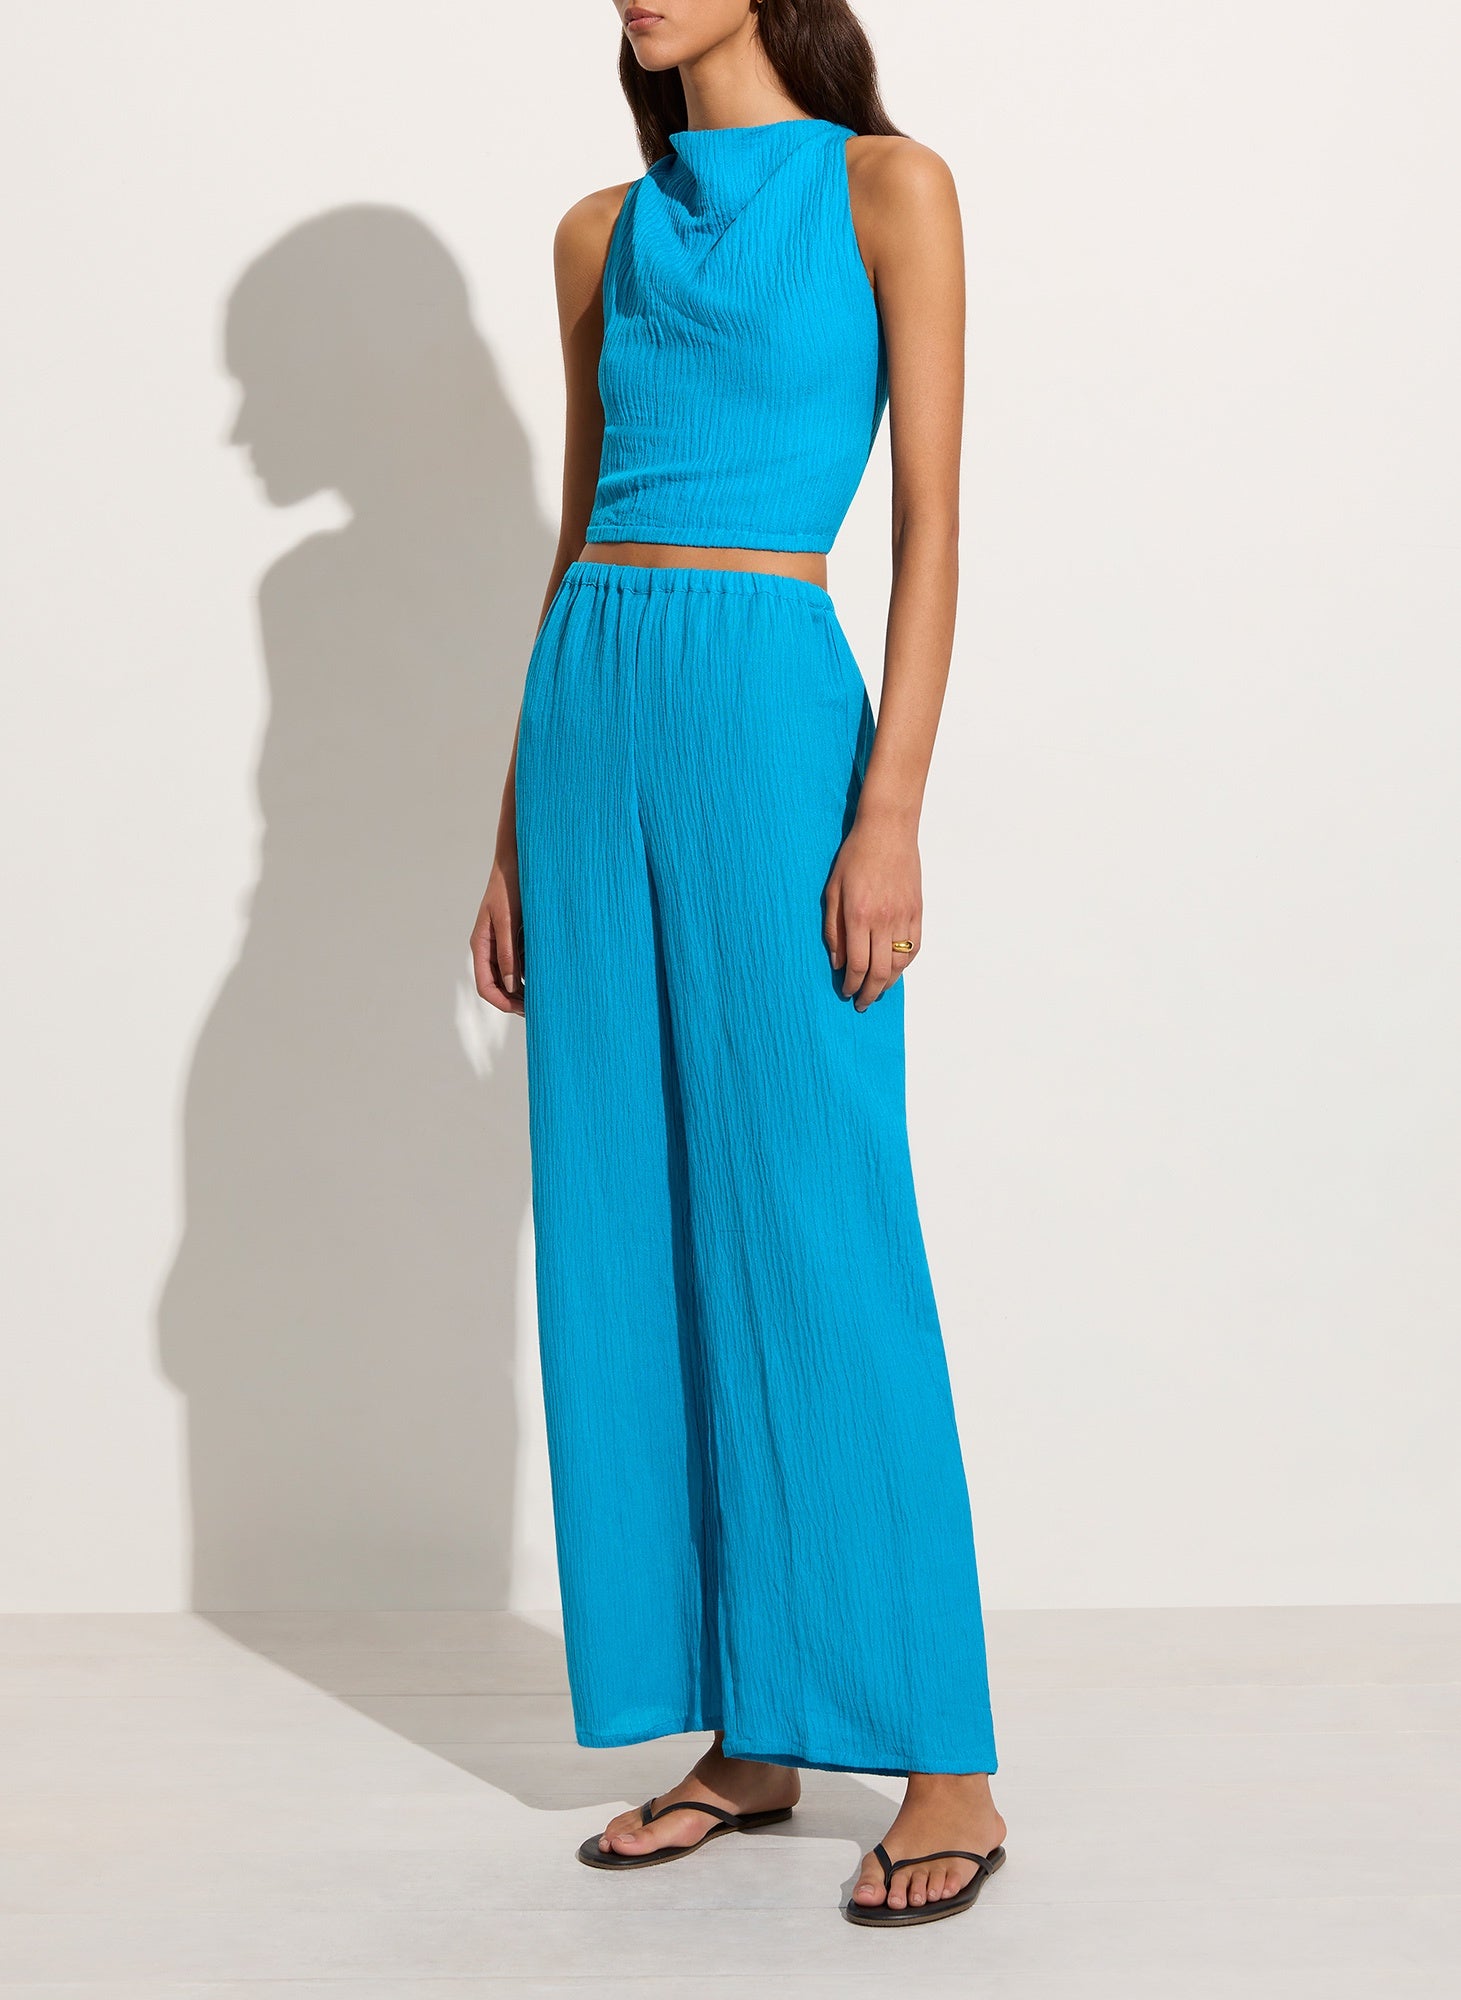 Melia Pant in Turquoise